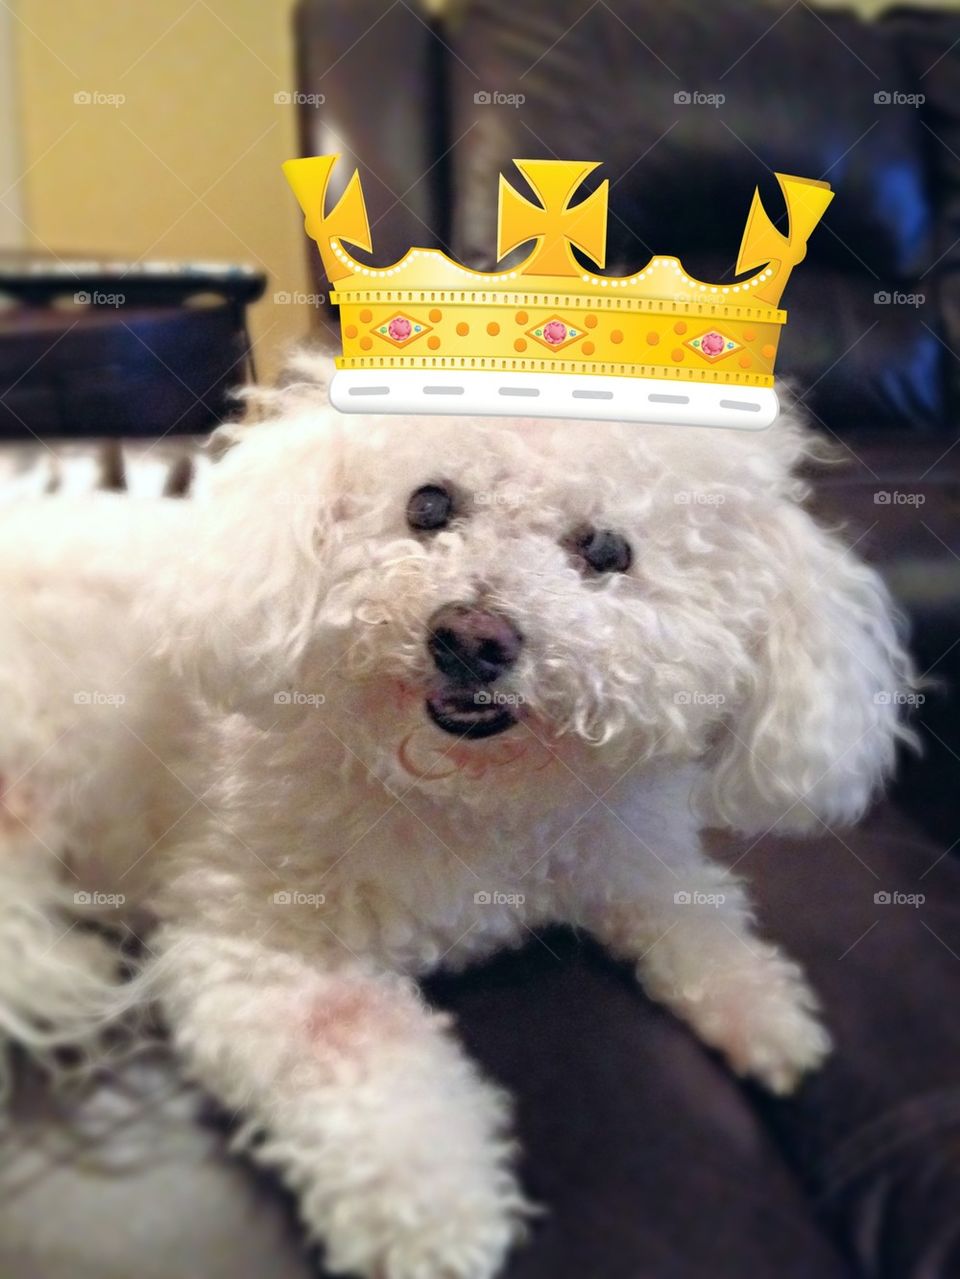 King of our house my smidgen Luciano